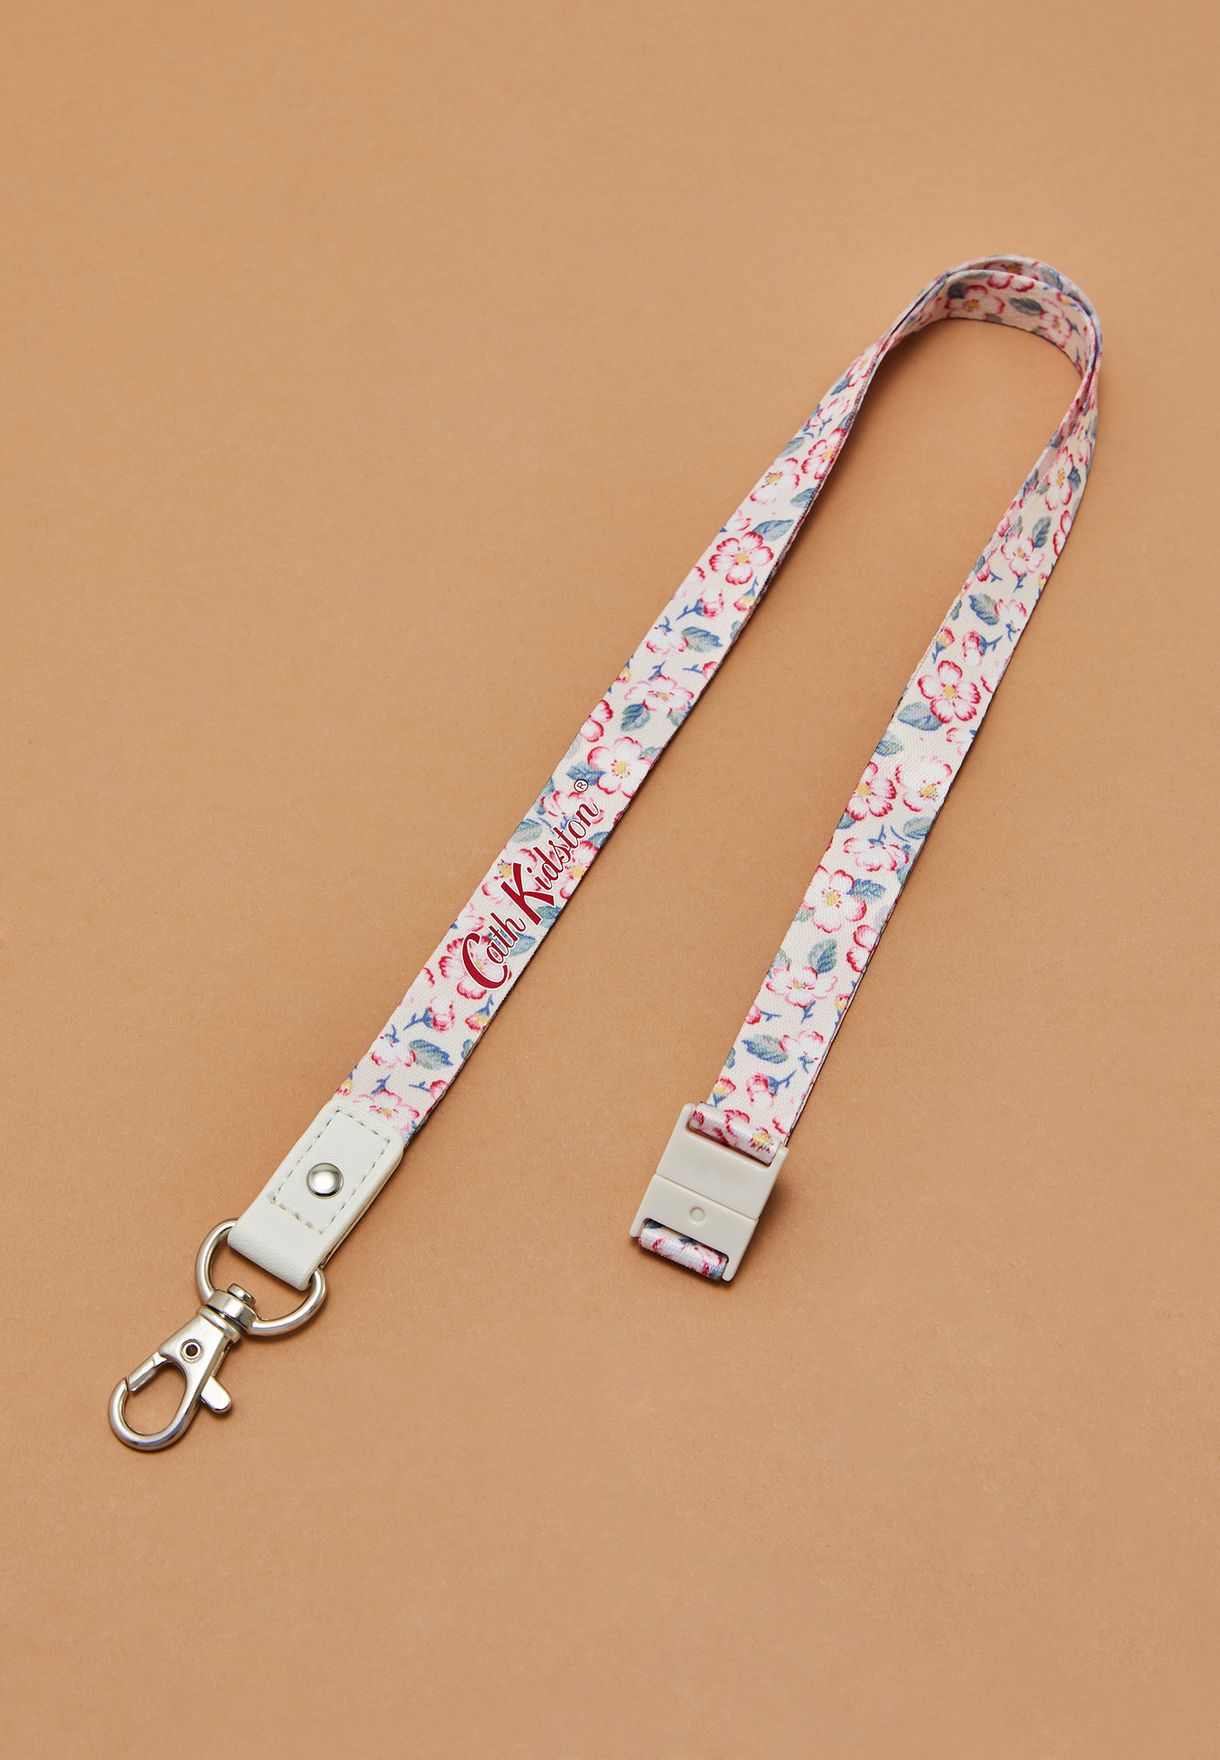 Cath Kidston Cath Kidston Lanyard Polyester Various Pattern Brand New with Tag 